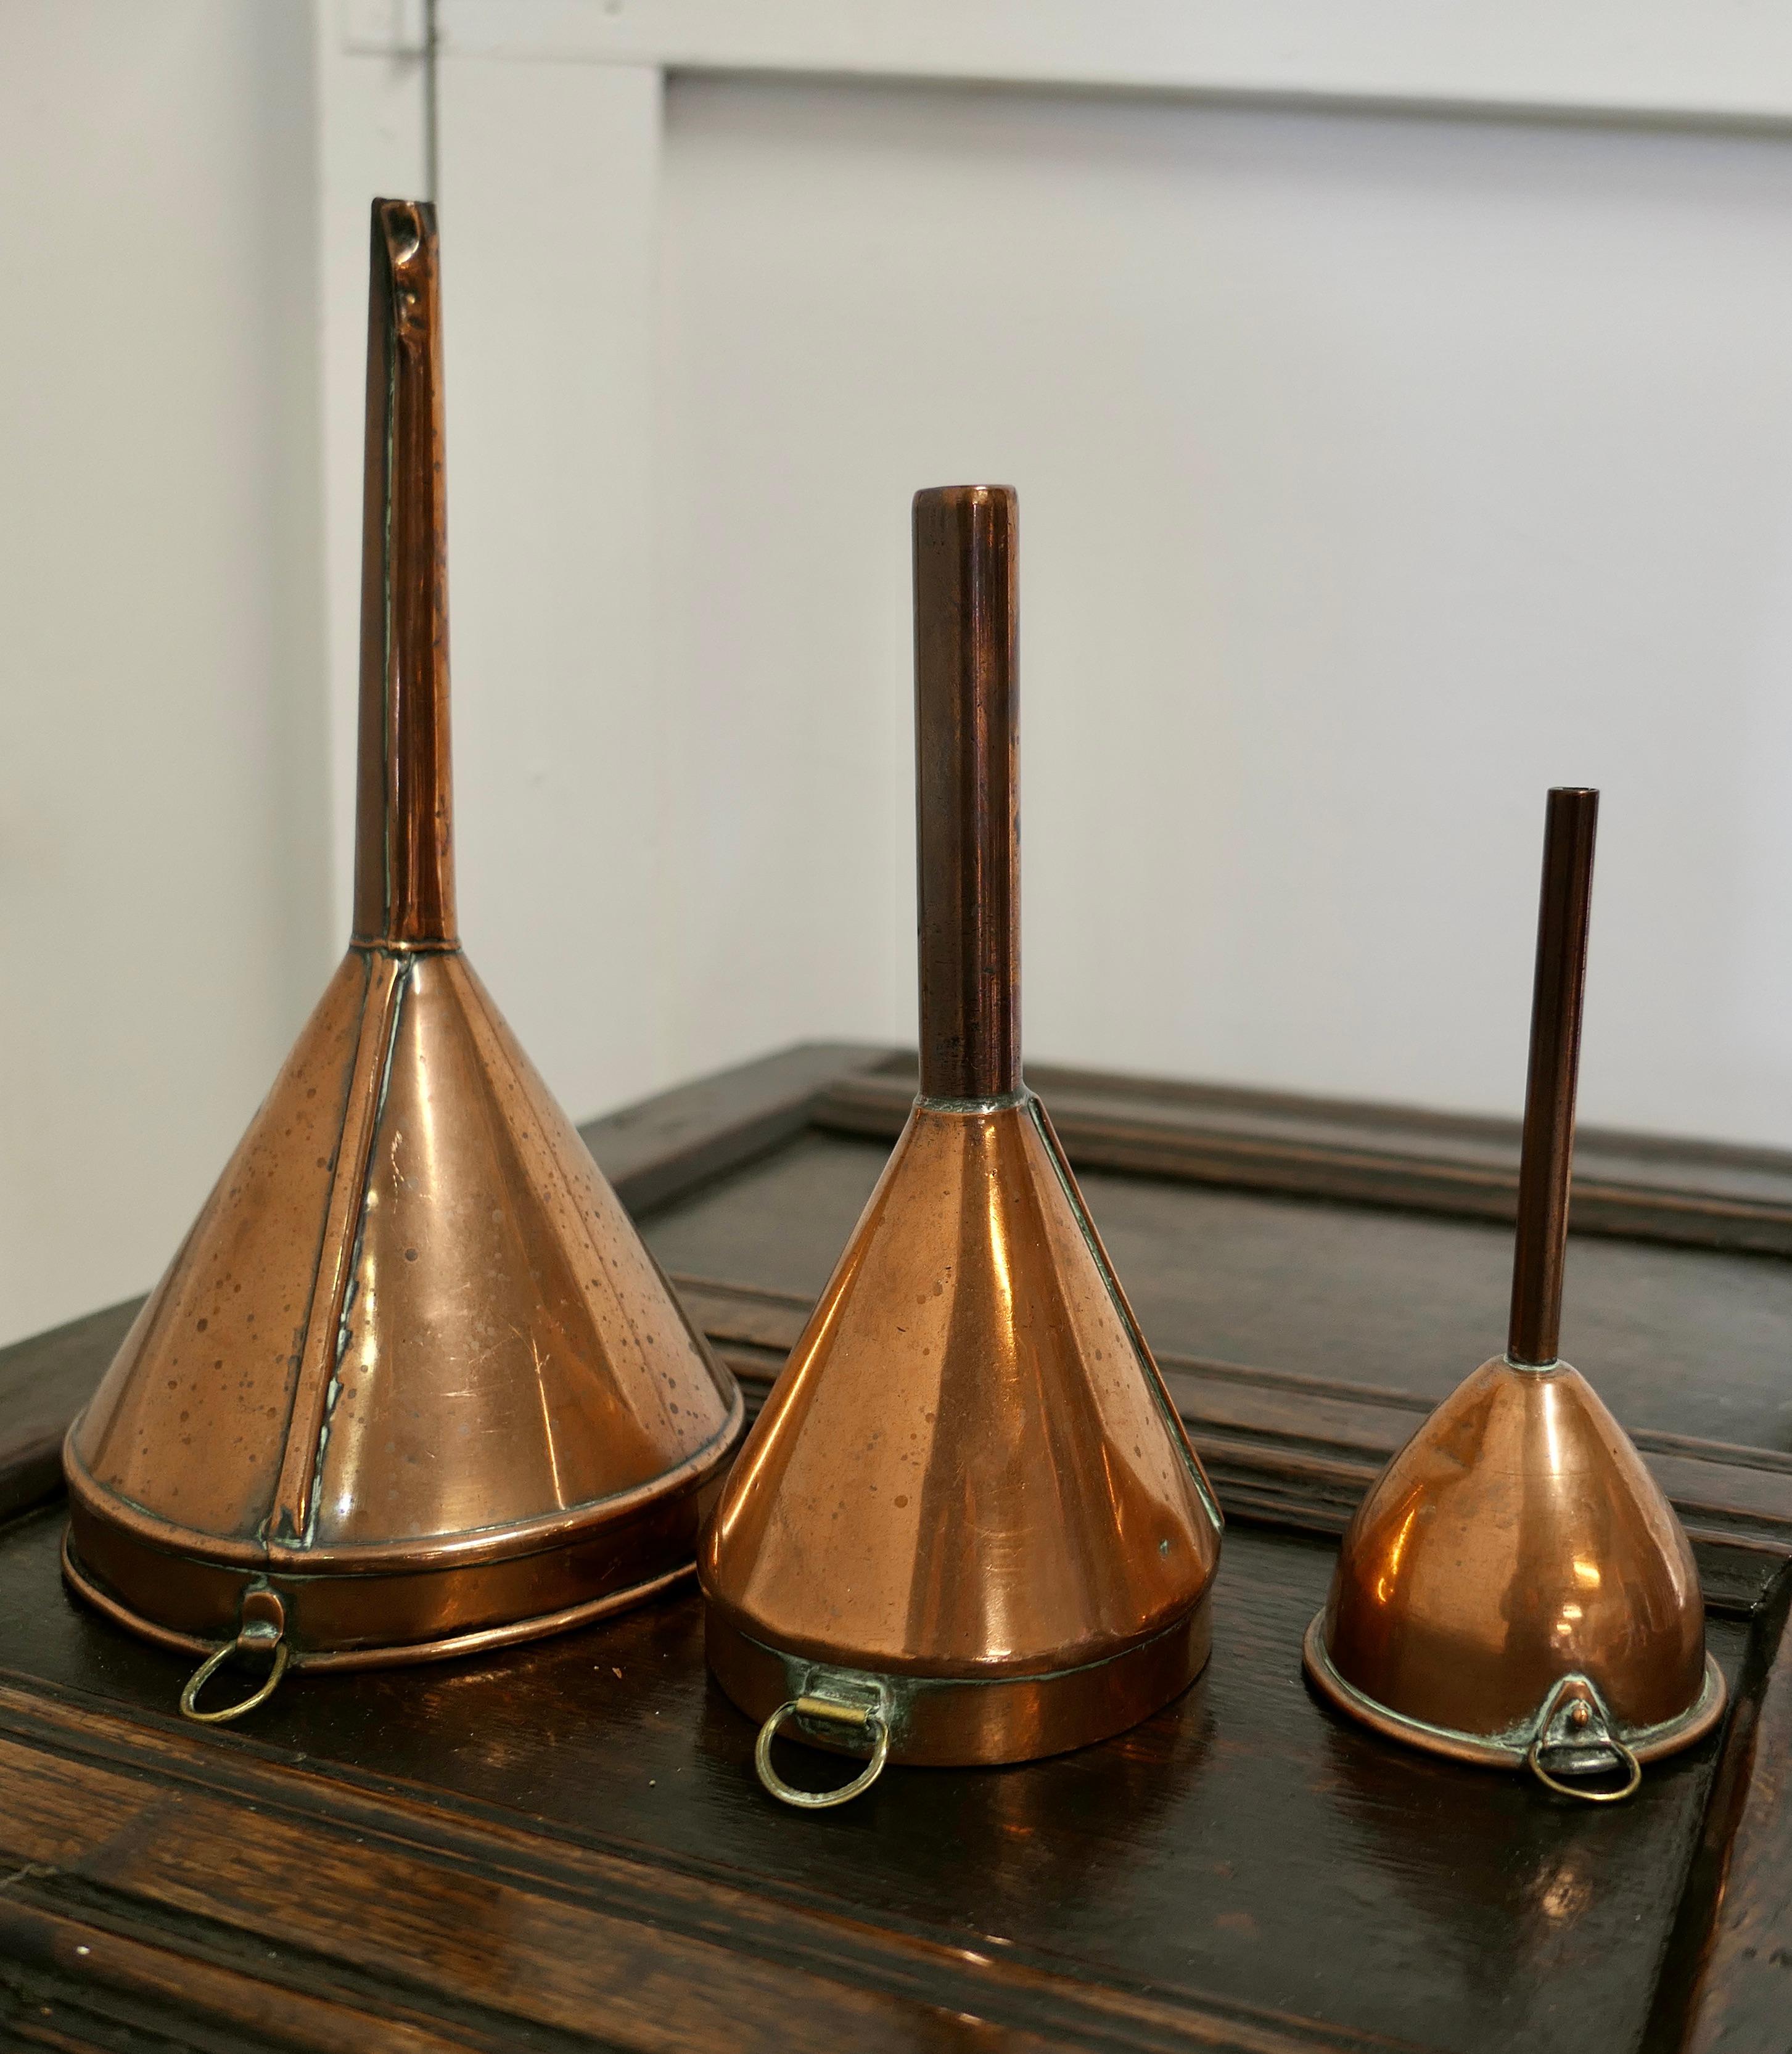 19th century copper Ale and wine funnel set

A Good Trio, the Ale and Wine Funnels are all in good used condition for their age, a handsome, decorative and useful set all with rings to hang them from
The largest funnel is 12”x 6” diameter
GF124.